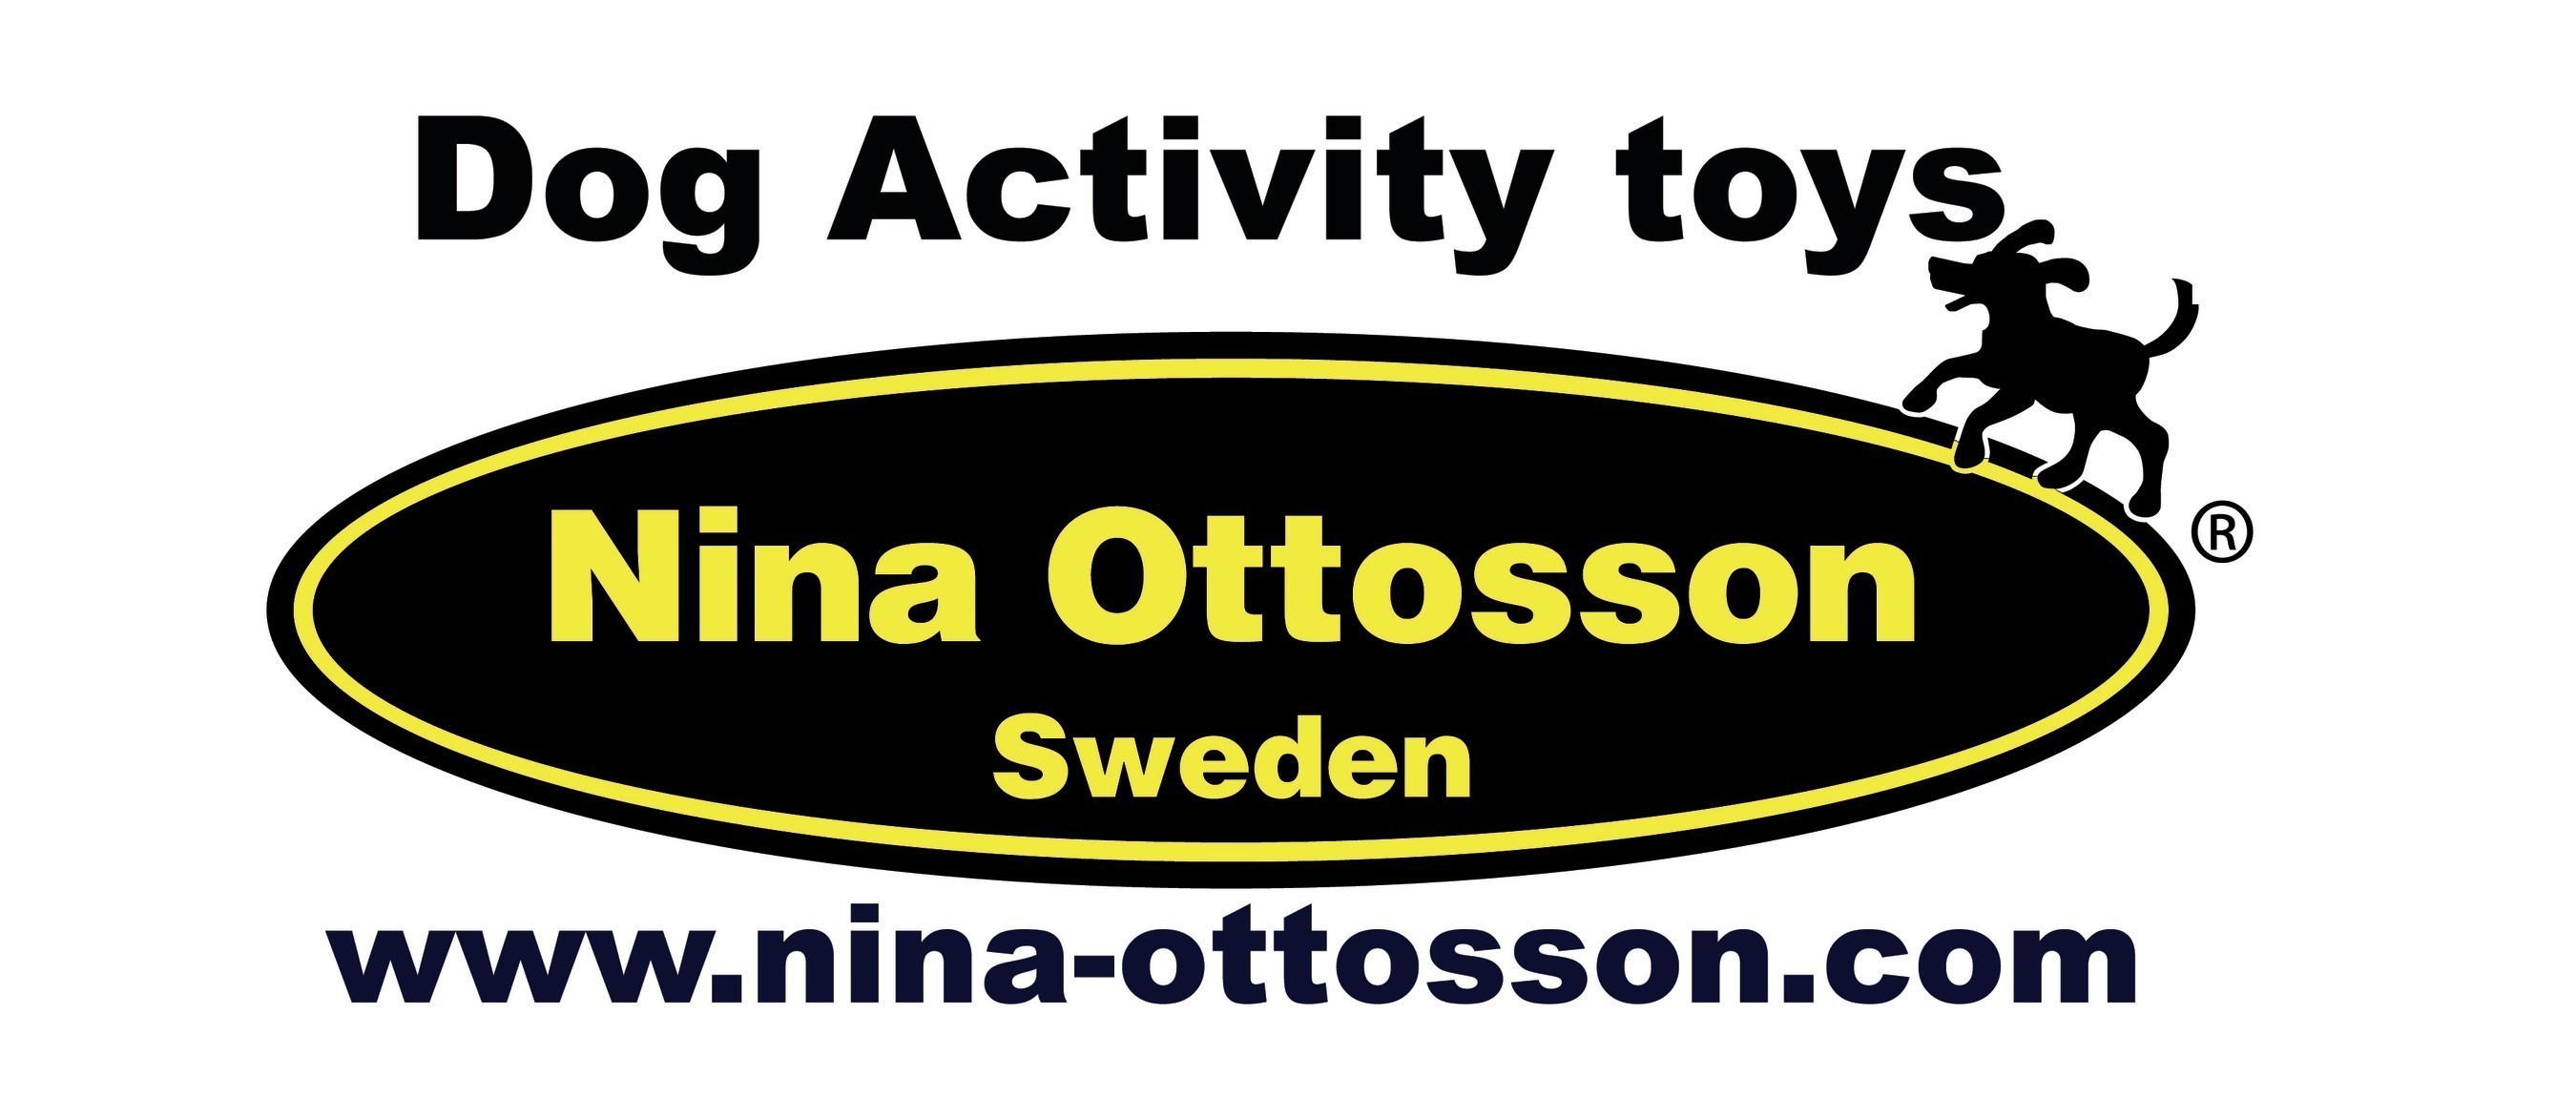 Nina Ottosson has pioneered the design and development of dog games and puzzle toys that utilize reward-based play patterns to keep pets stimulated.